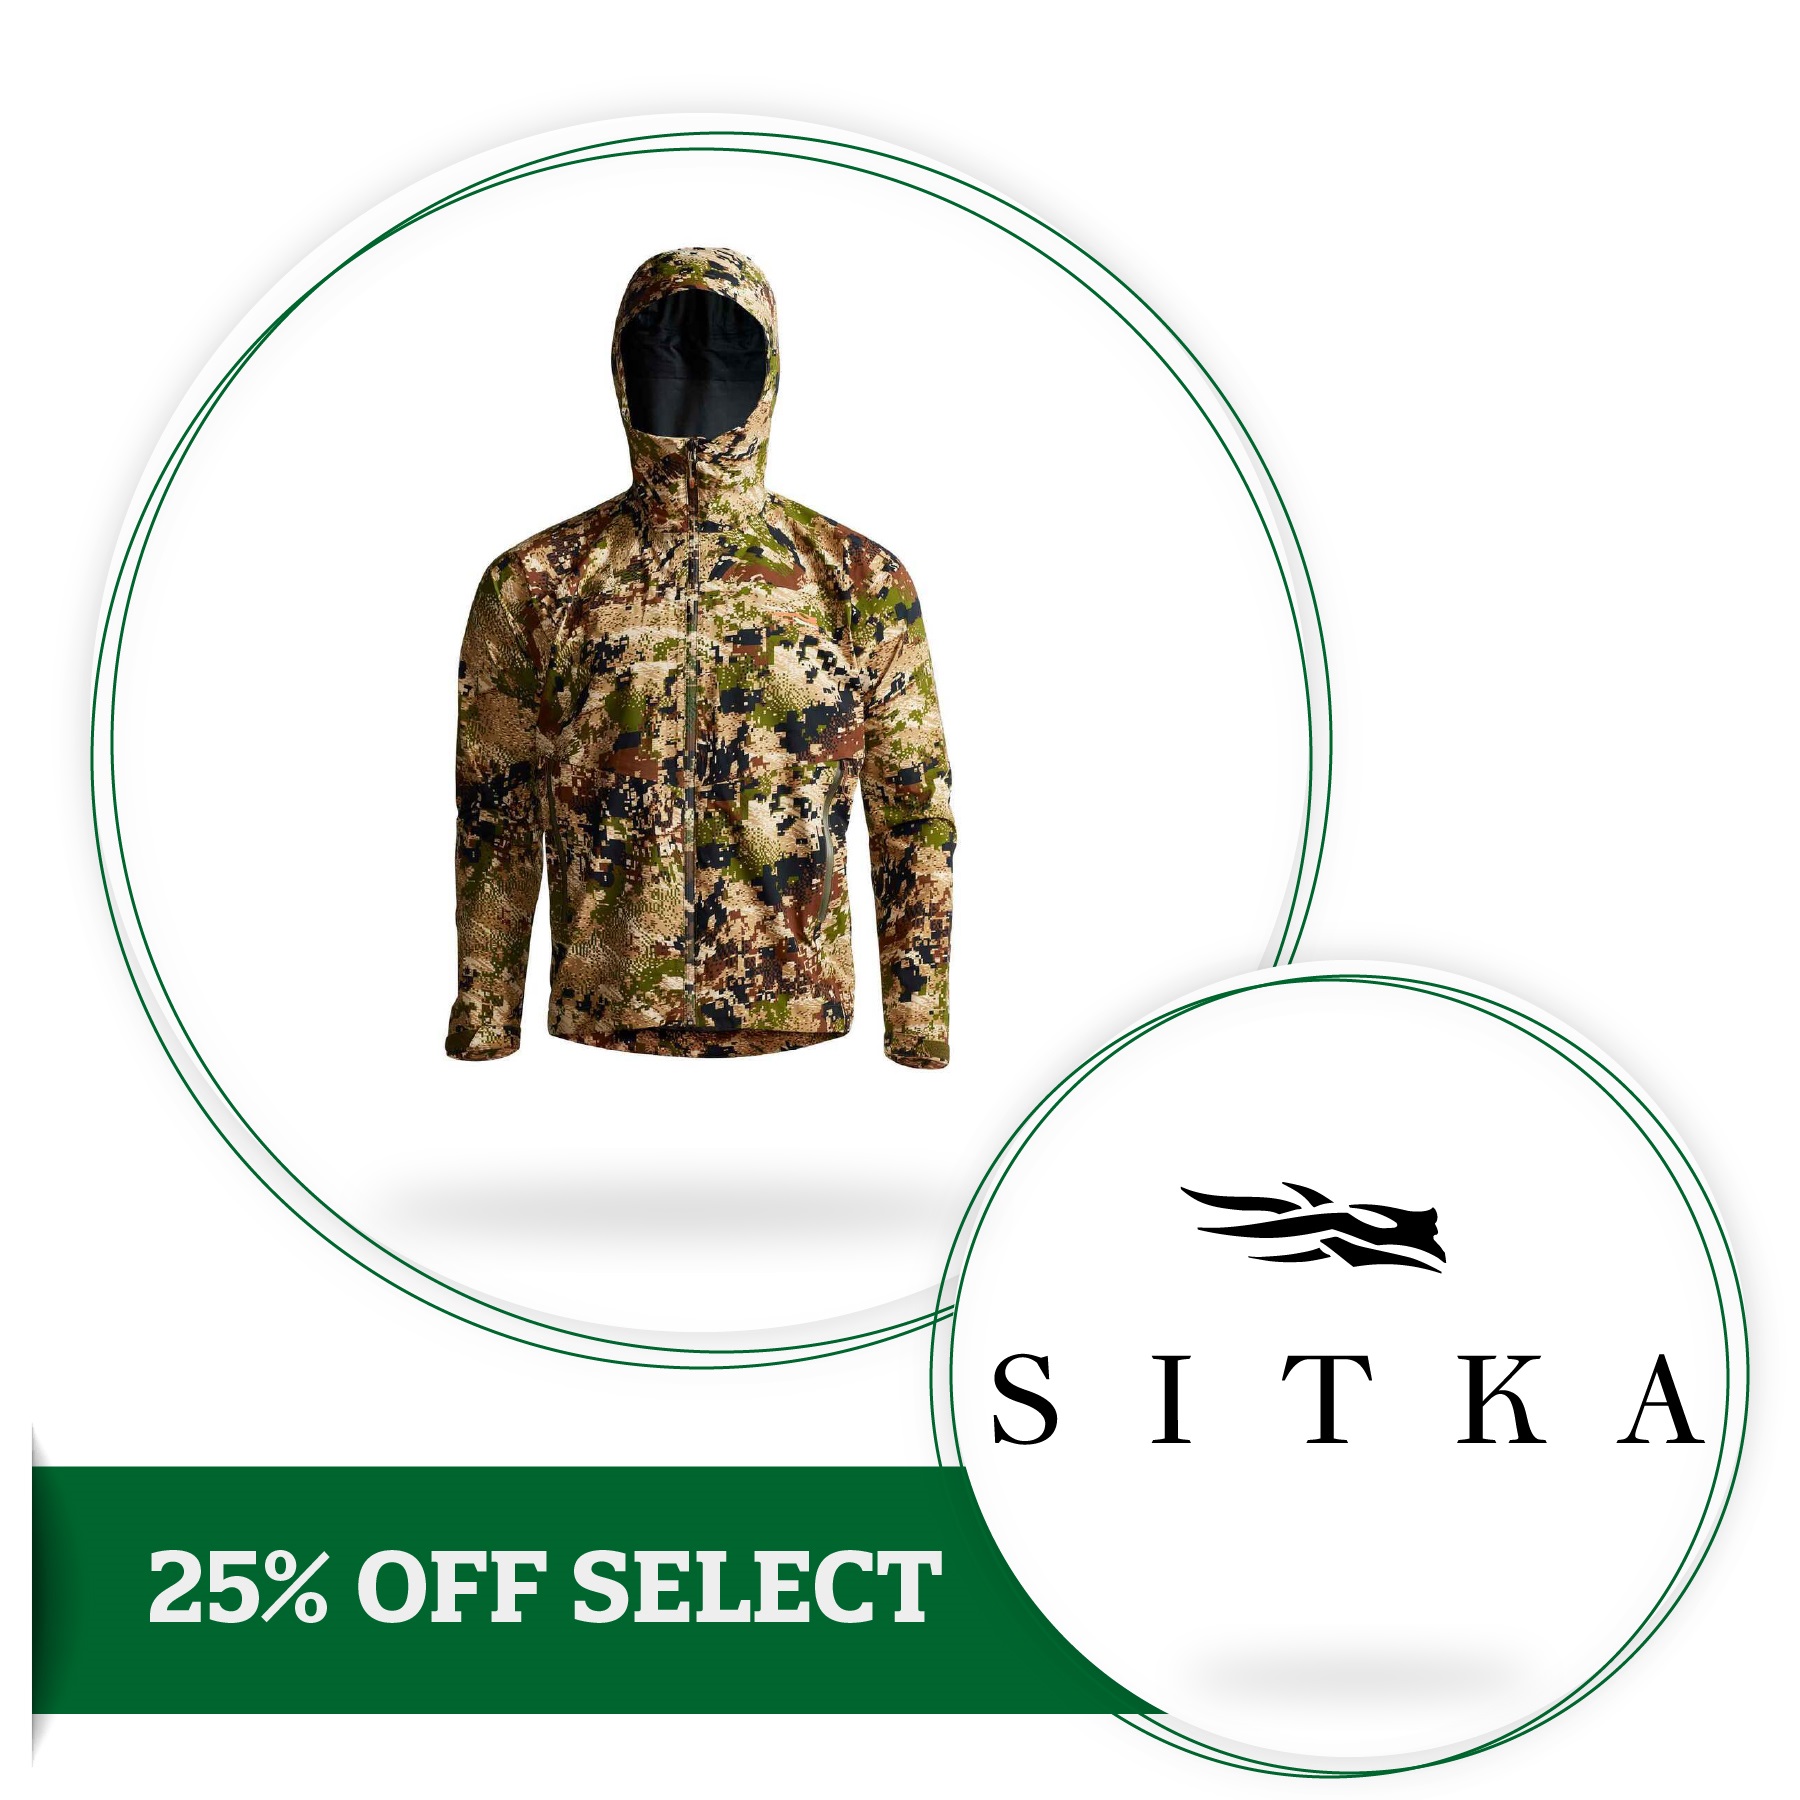 Sitka New Year's Sale